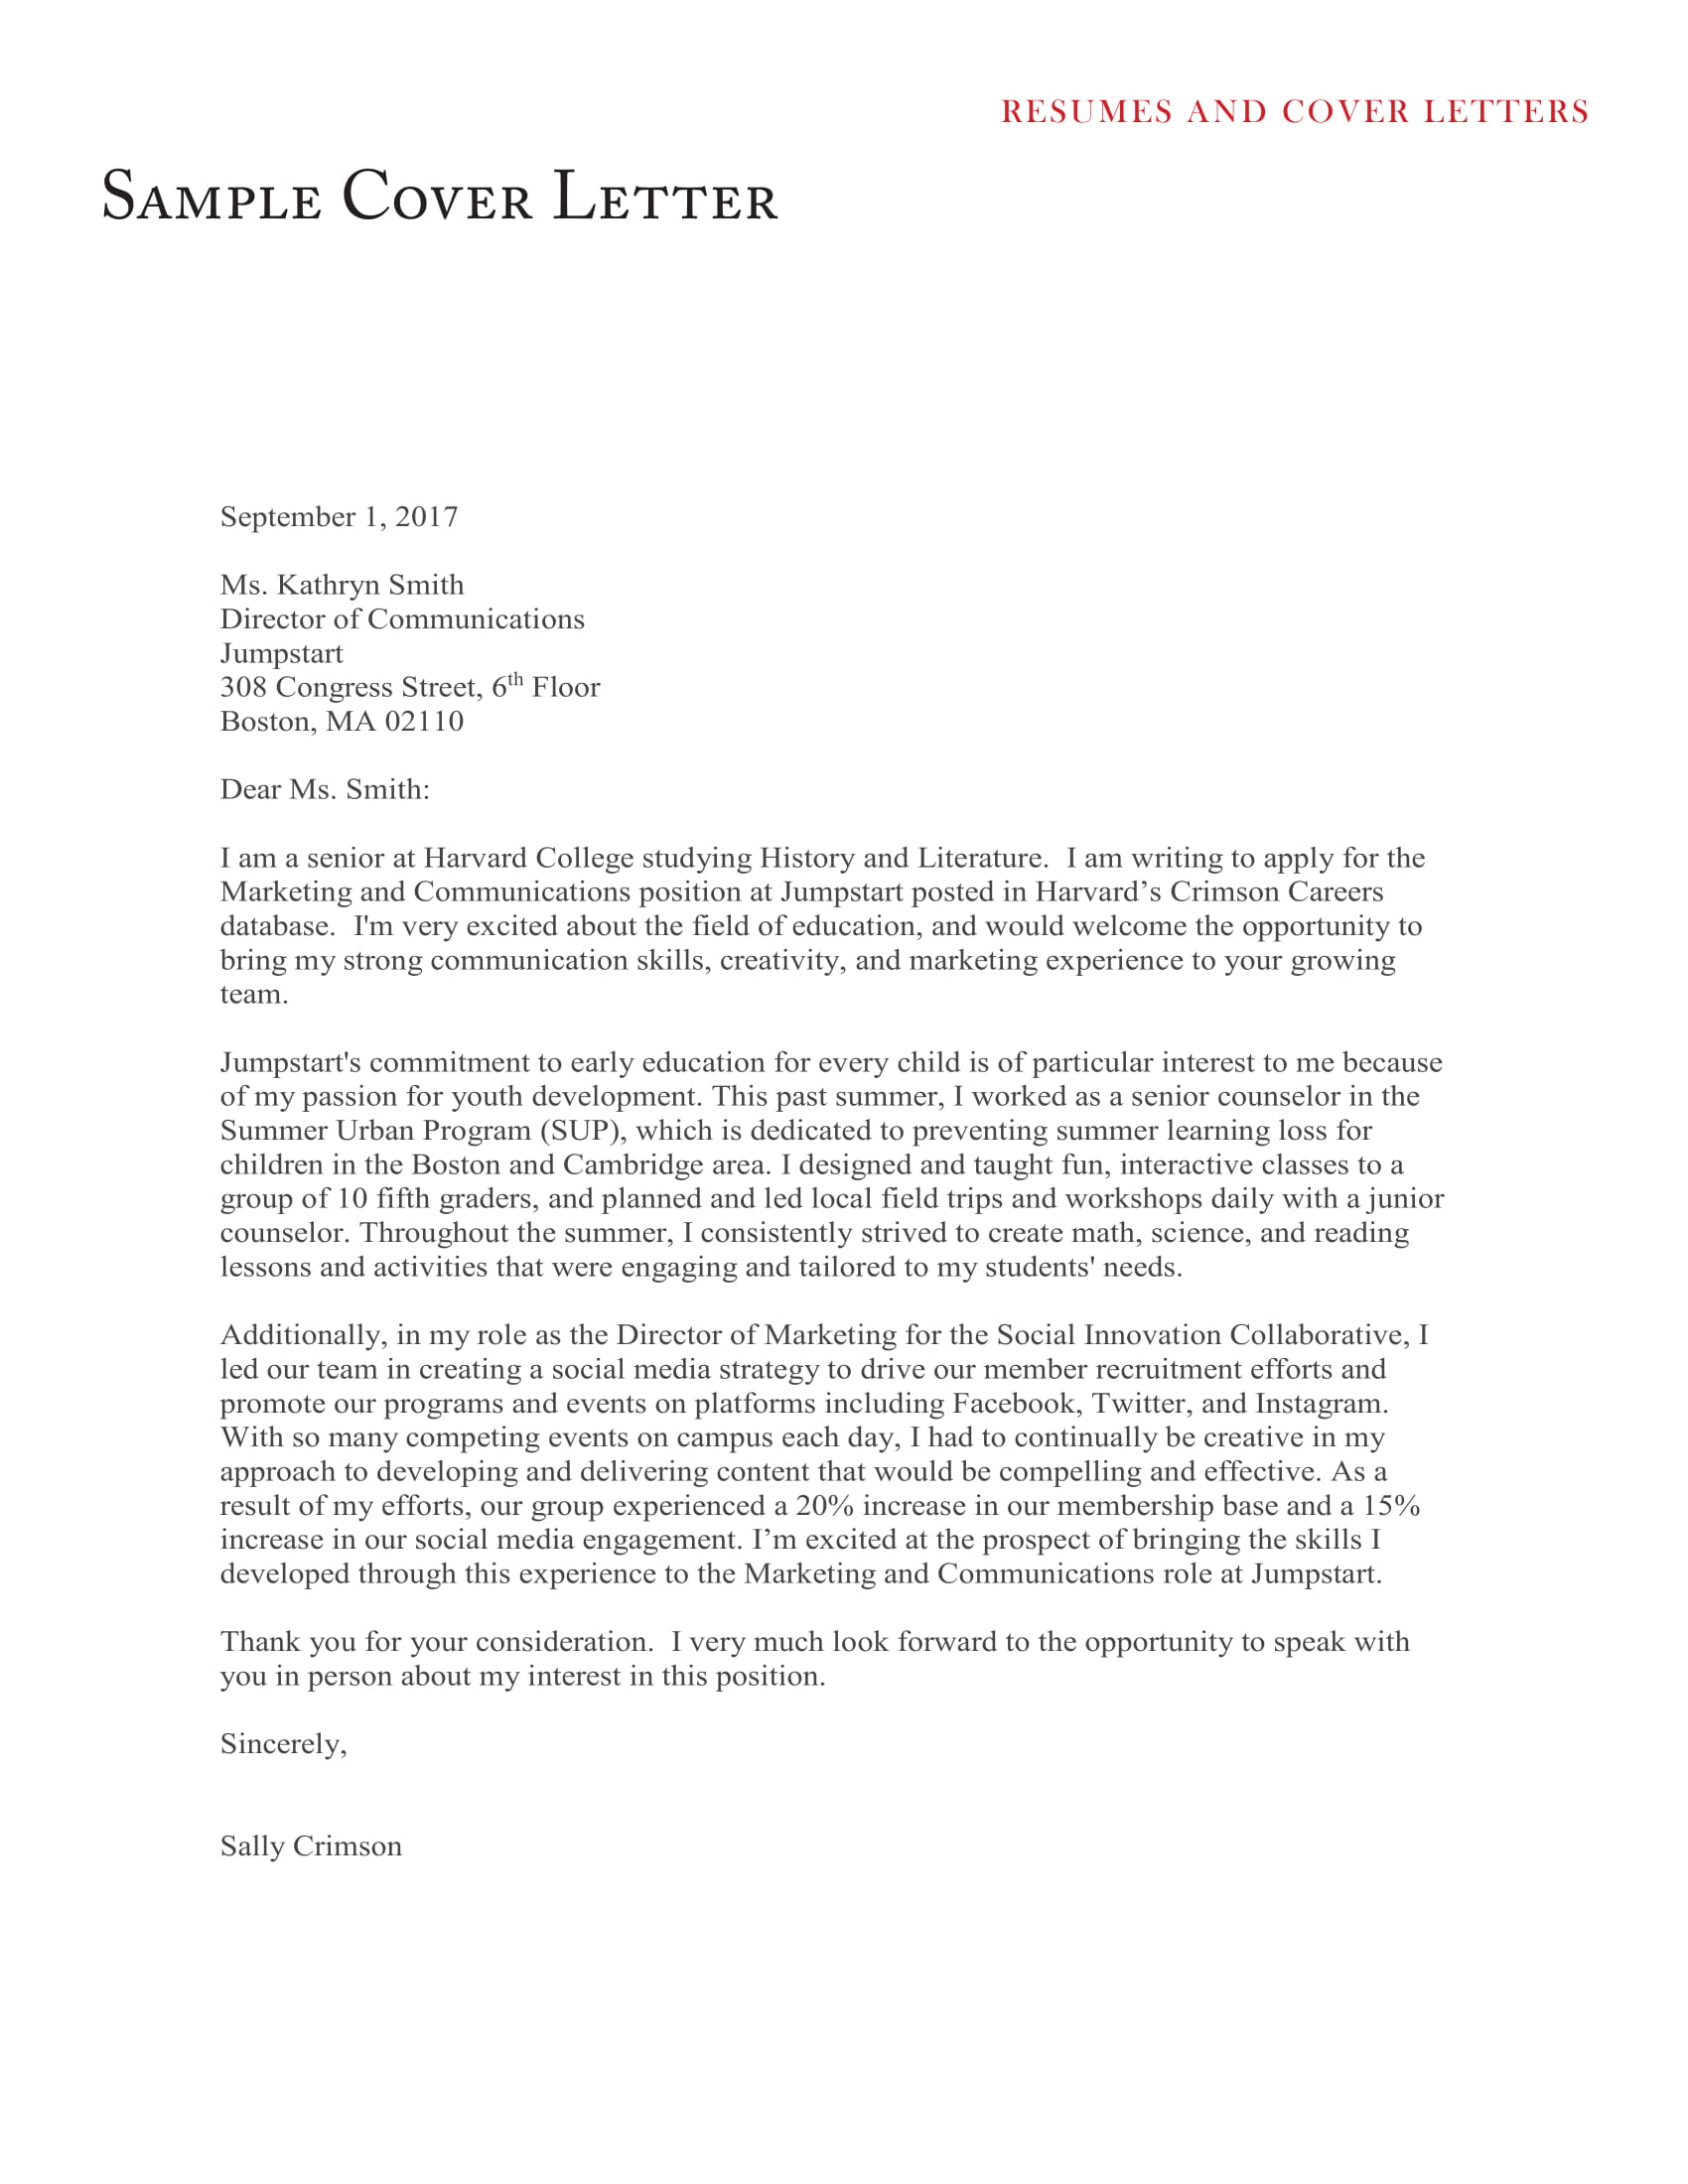 examples of cover letters pdf